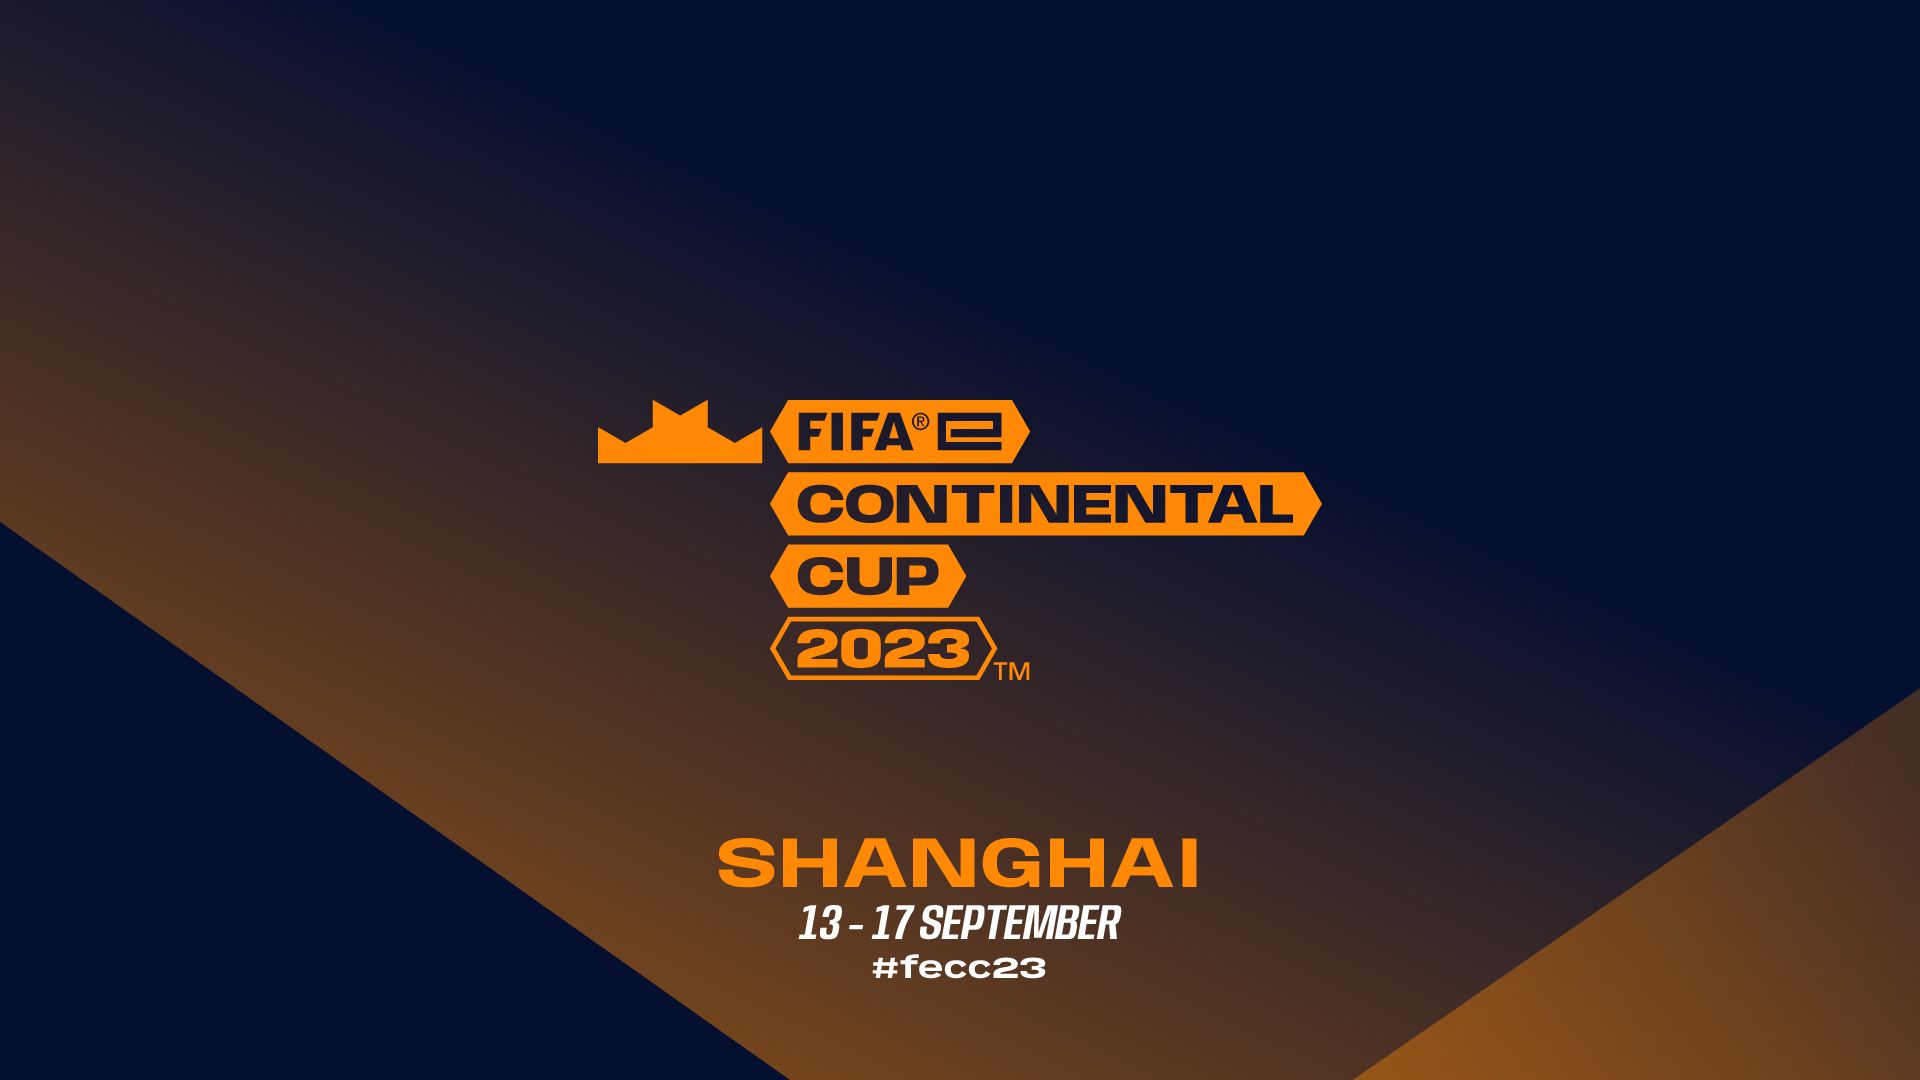 Firstever FIFAe event in China FIFAe Continental Cup 2023 to be